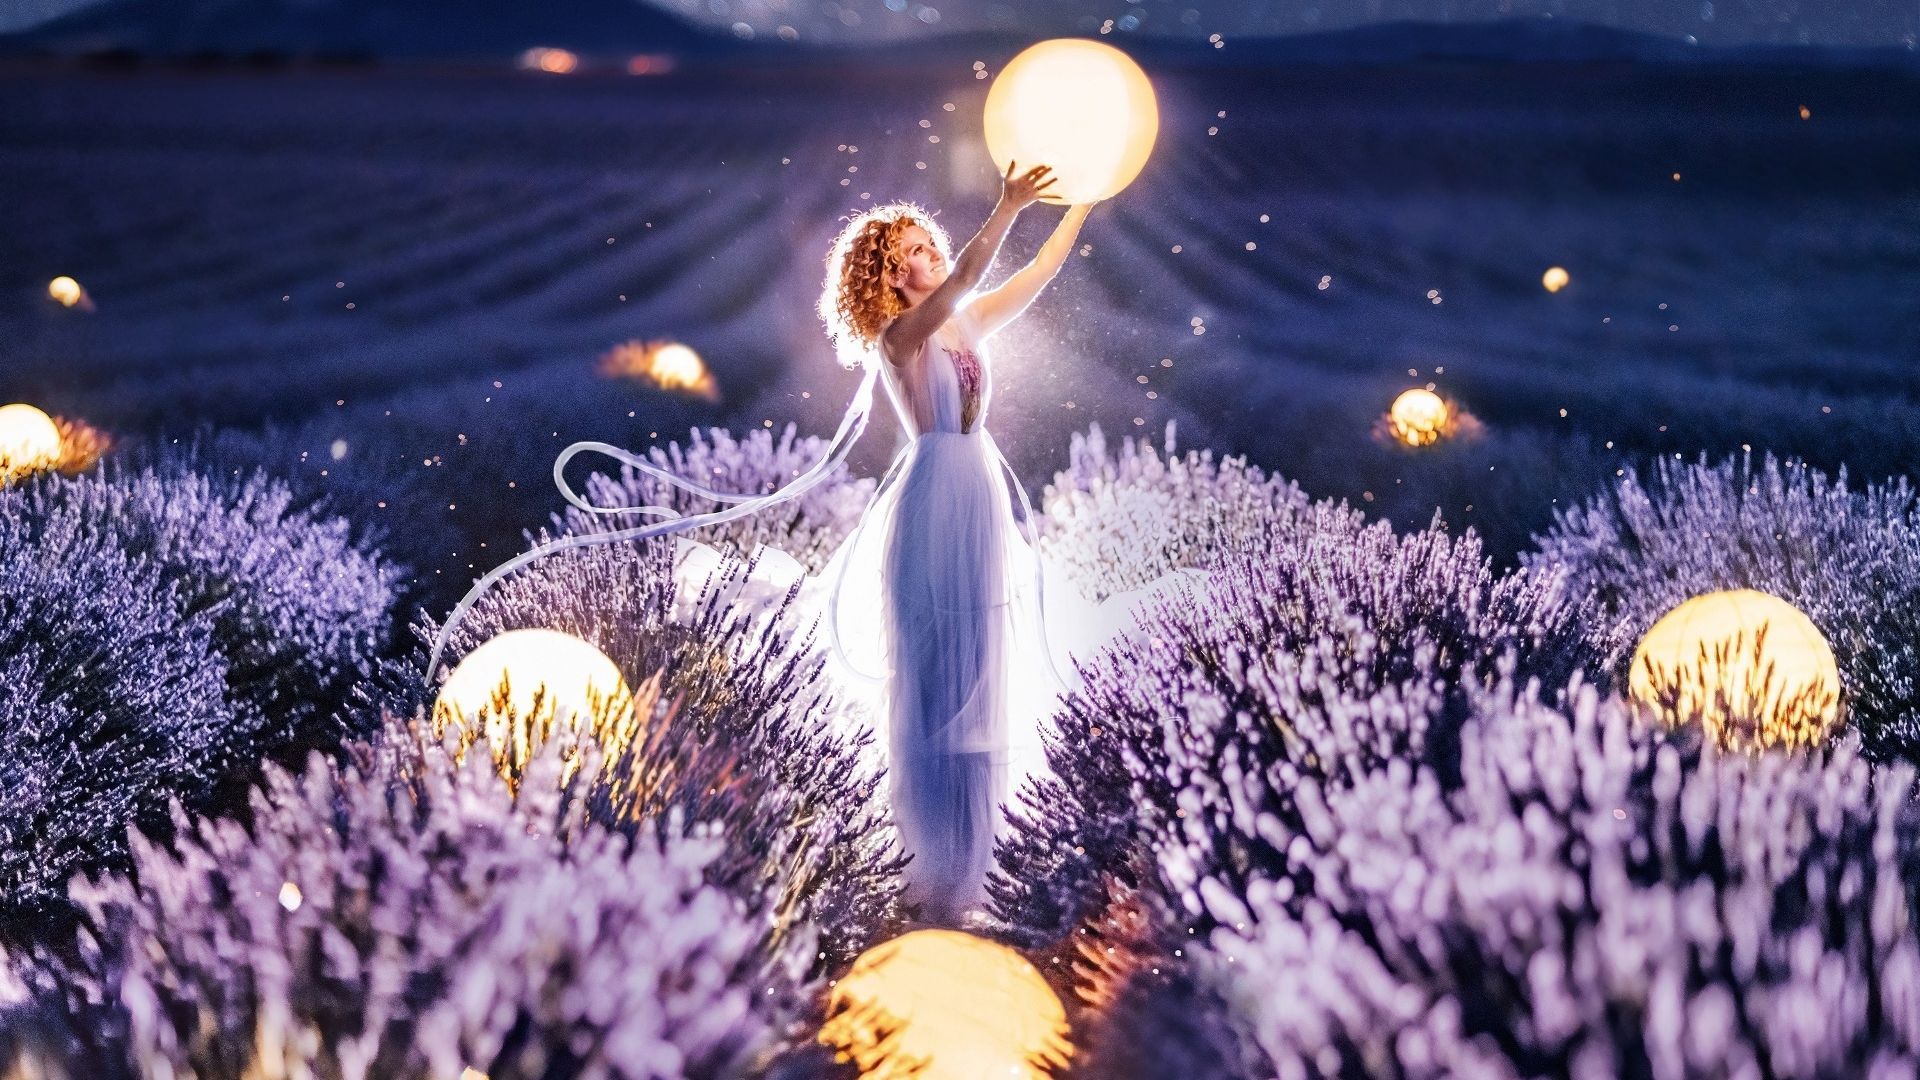 Desktop wallpaper lights, woman in lavender farm, night, nature, HD image, picture, background, ed9f40